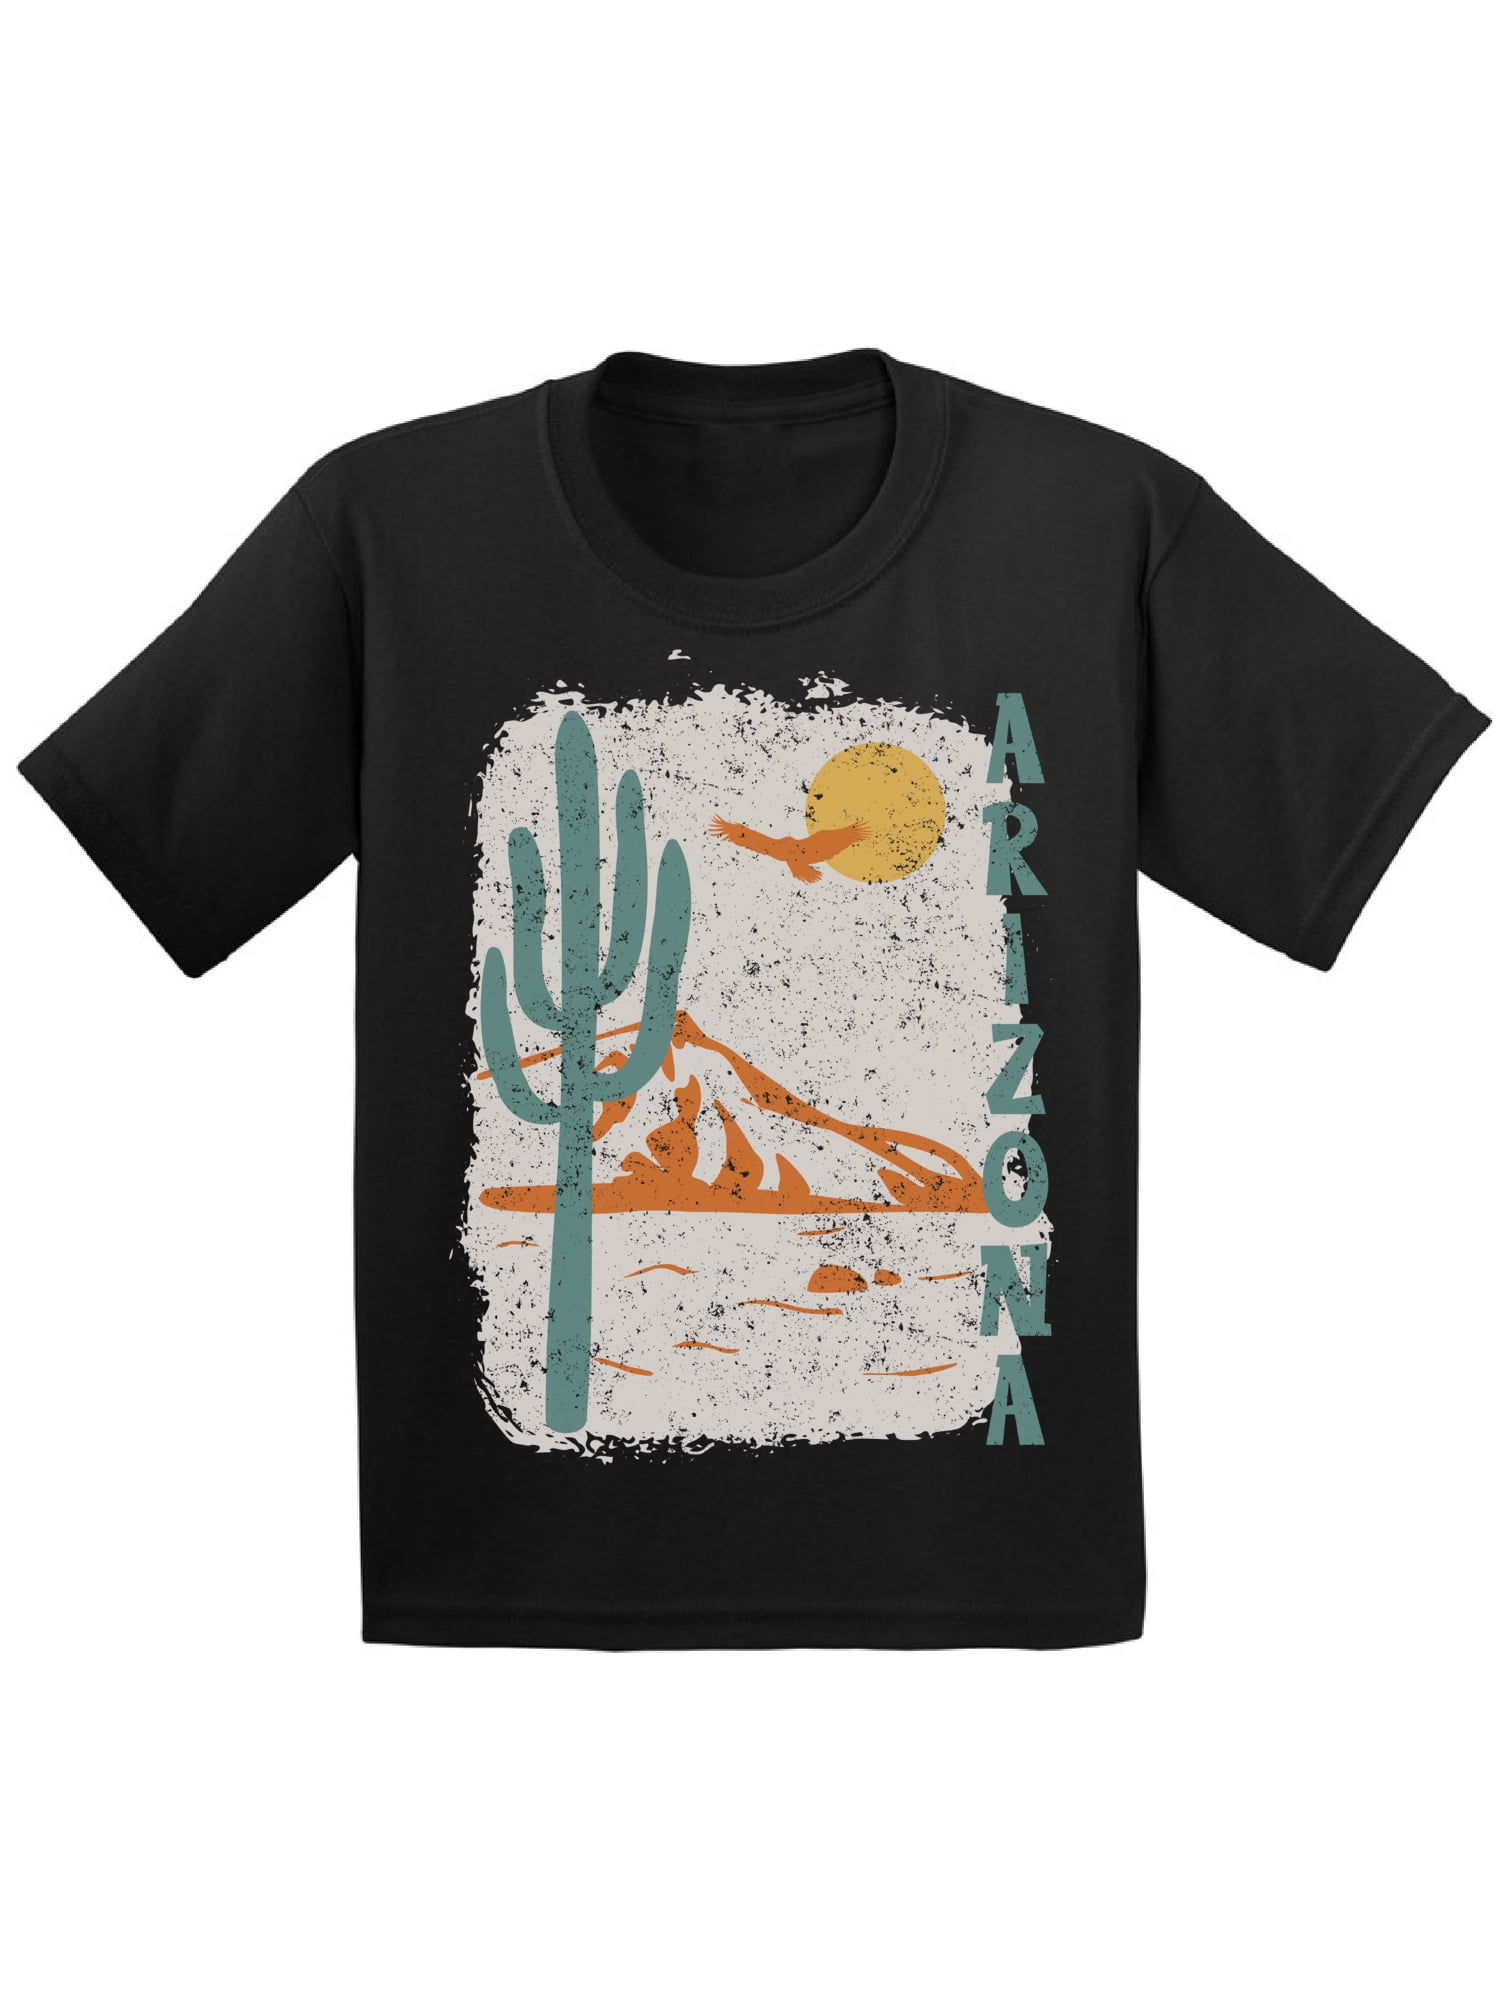 Arizona Shirt for Kids Graphic to - State 6 - Years USA - 15 Age Youth AZ Souvenir Novelty